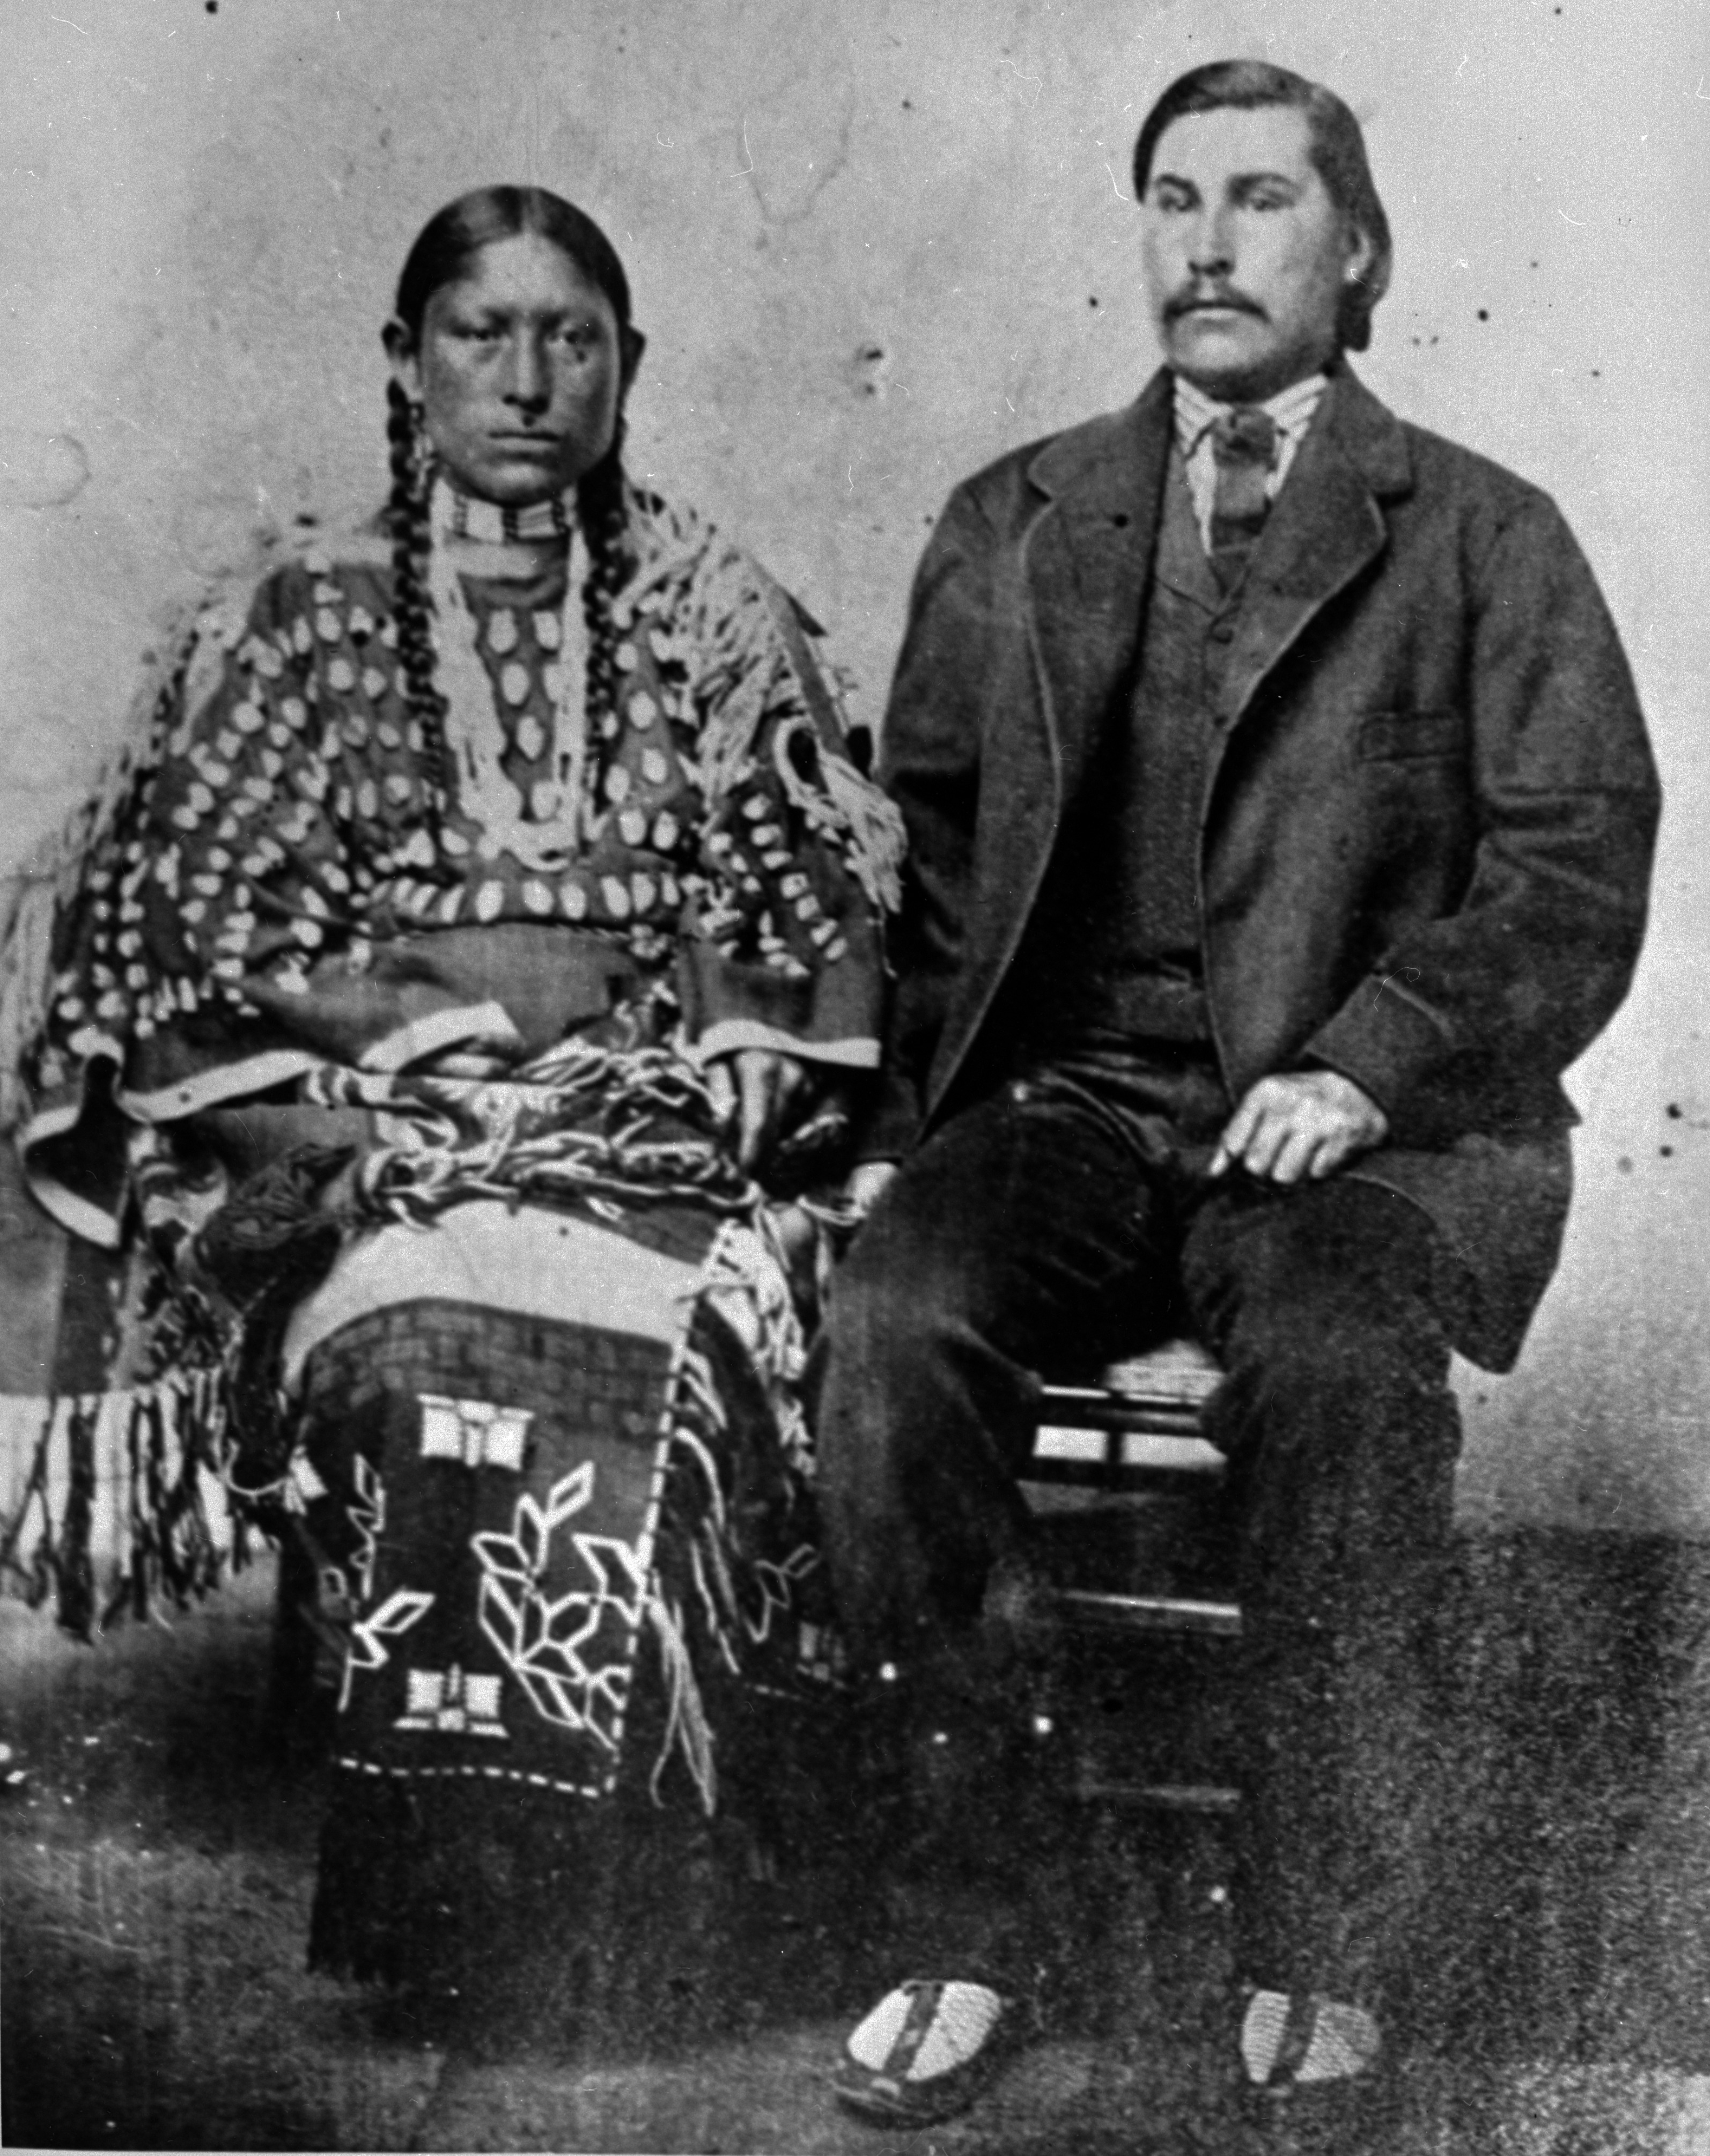 Photo of an Indigenous woman seated on the left, next to a non-Indigenous man seated on the right in this historic image. She has long hair worn in two braids and wears a dress adorned with many sewn-on elk teeth, as well as other decoration on her long dress. He is wearing a three-piece suit with necktie, and mocassins.